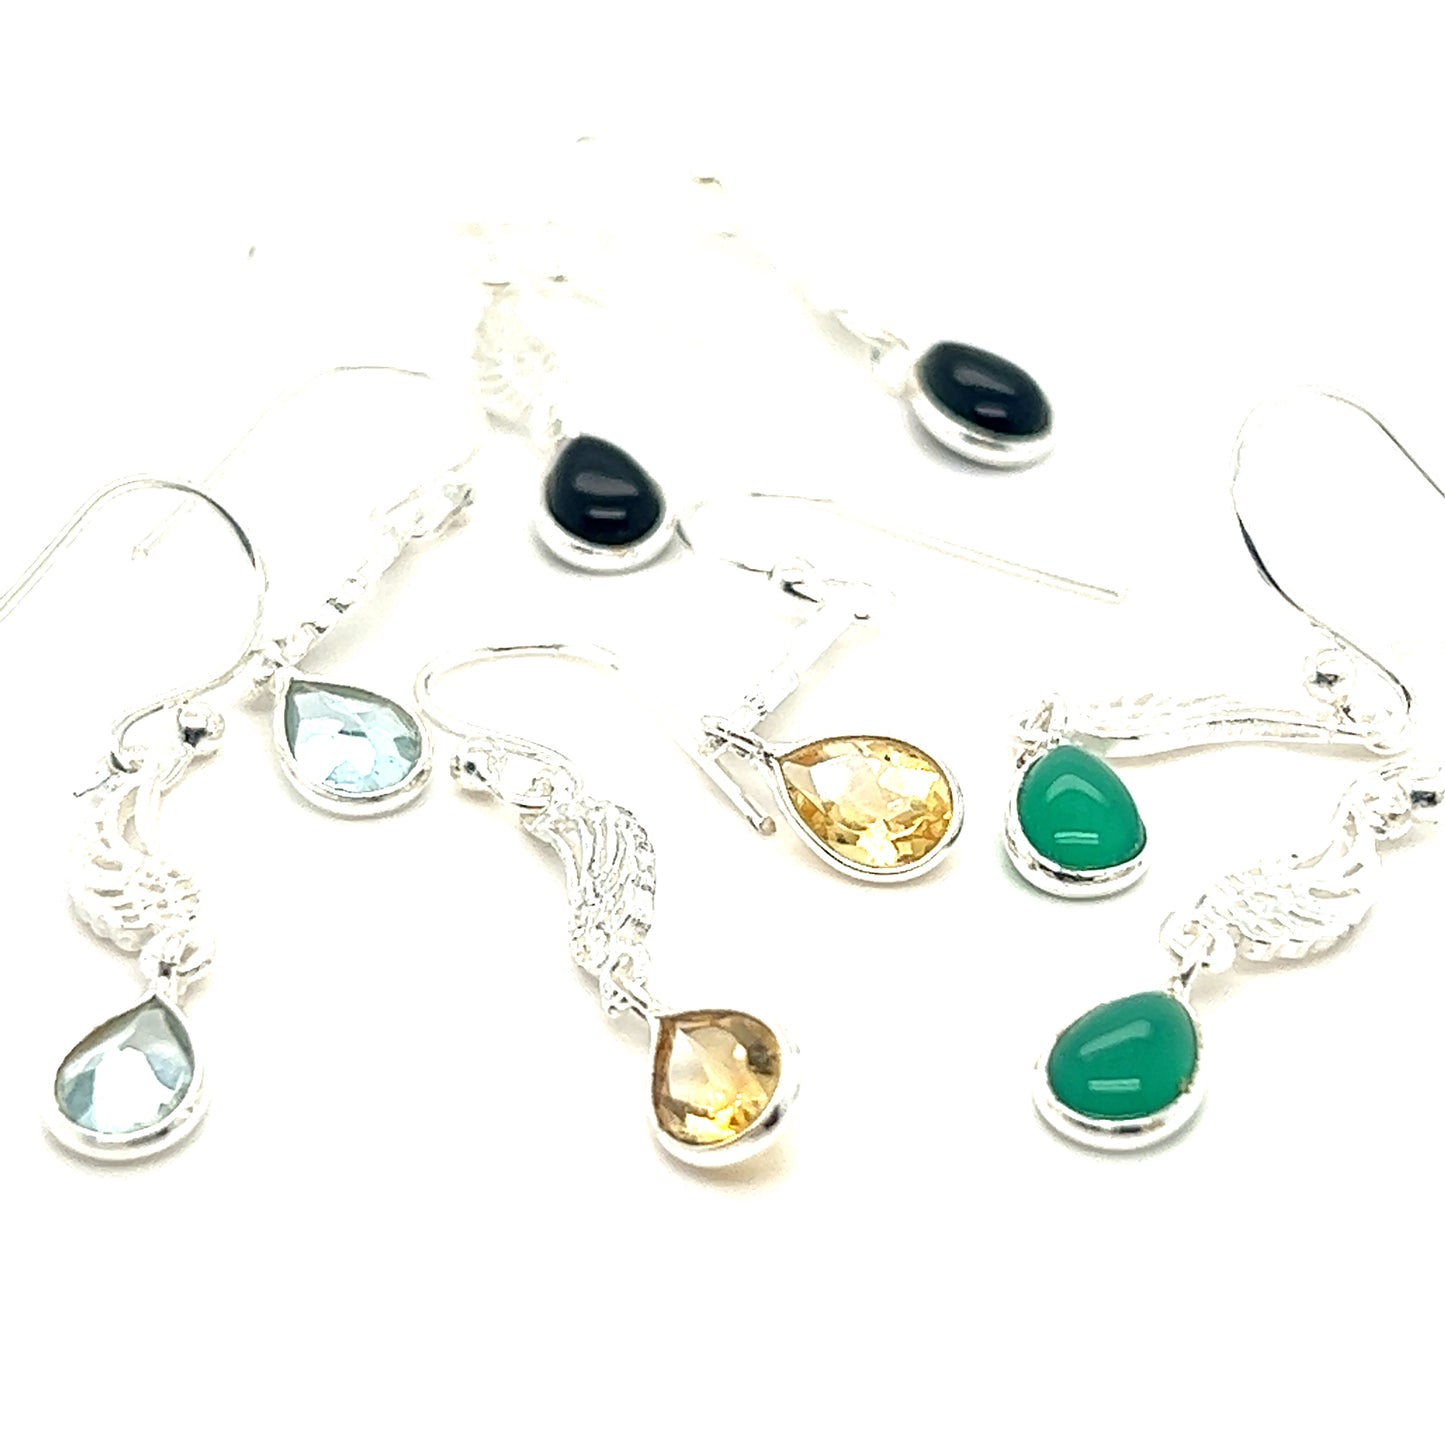 
                  
                    A set of Super Silver angel wing earrings adorned with a variety of colorful stones, including teardrop shaped stones. Incorporating SEO keywords ensures these stunning earrings are easily discoverable by online shoppers seeking statement jewelry pieces.
                  
                